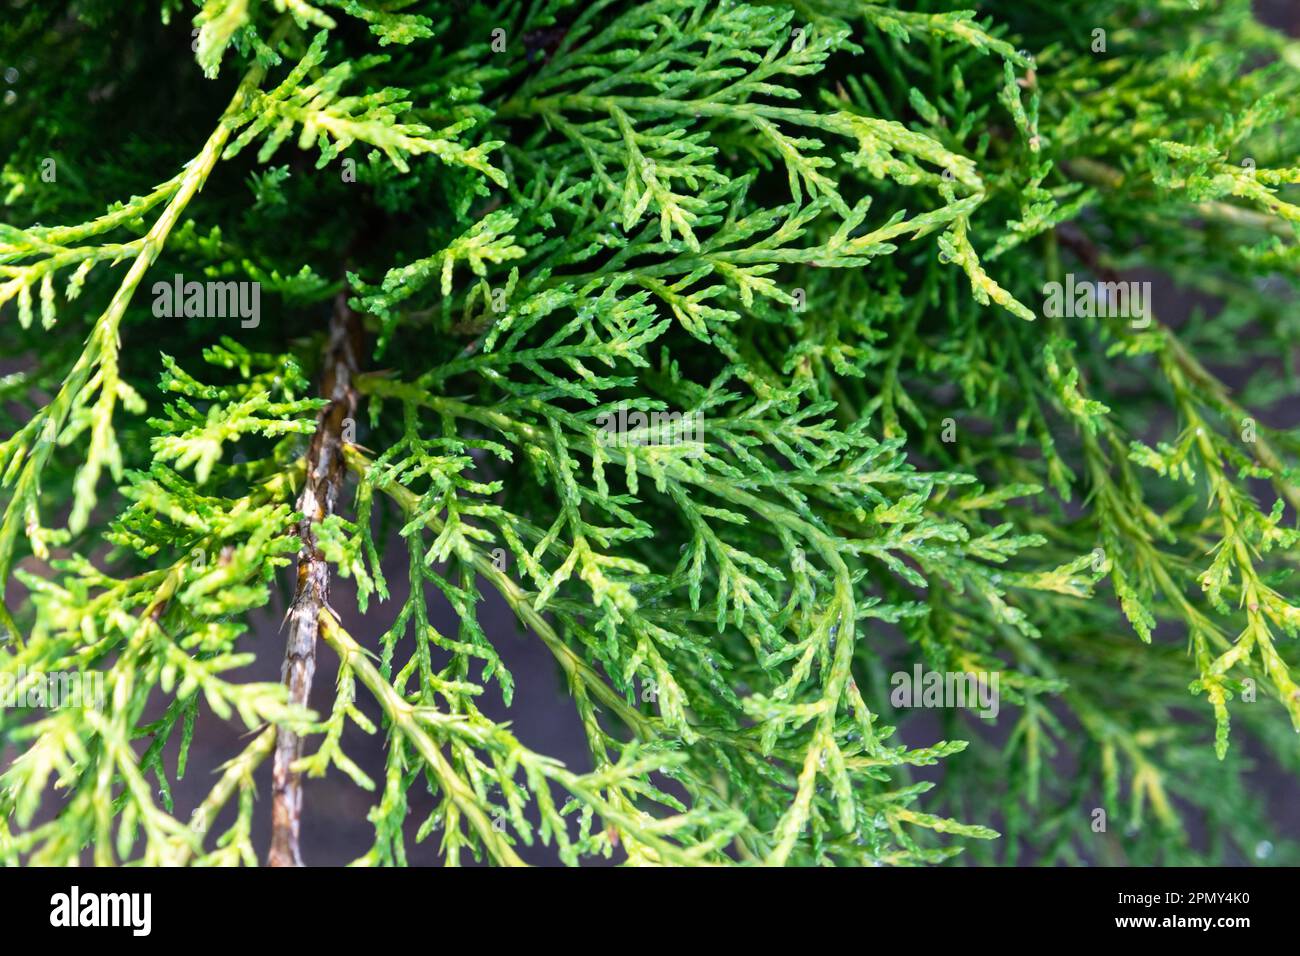 Young shoots with fresh bright green needles on juniper branches, thuja. Pattern, green natural background Stock Photo